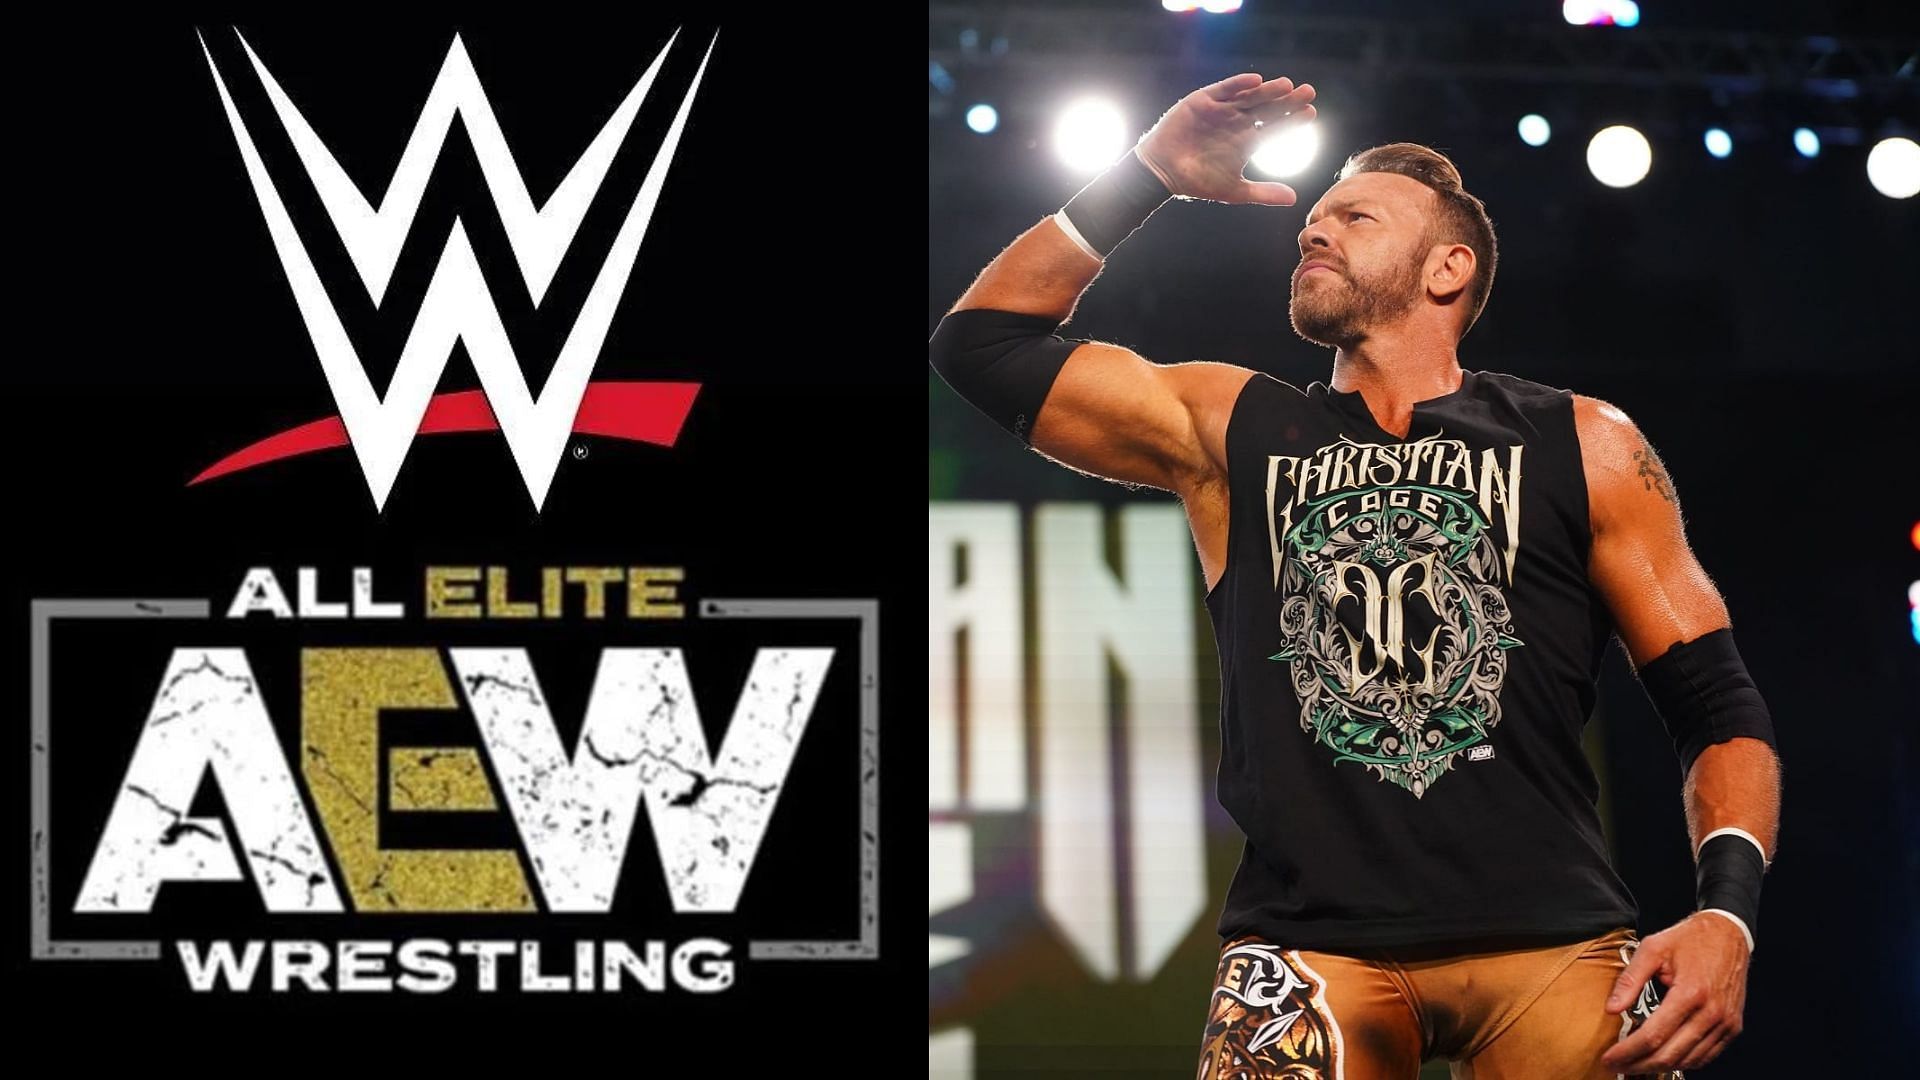 WWE and All Elite Wrestling logos (left); Christian Cage (right)